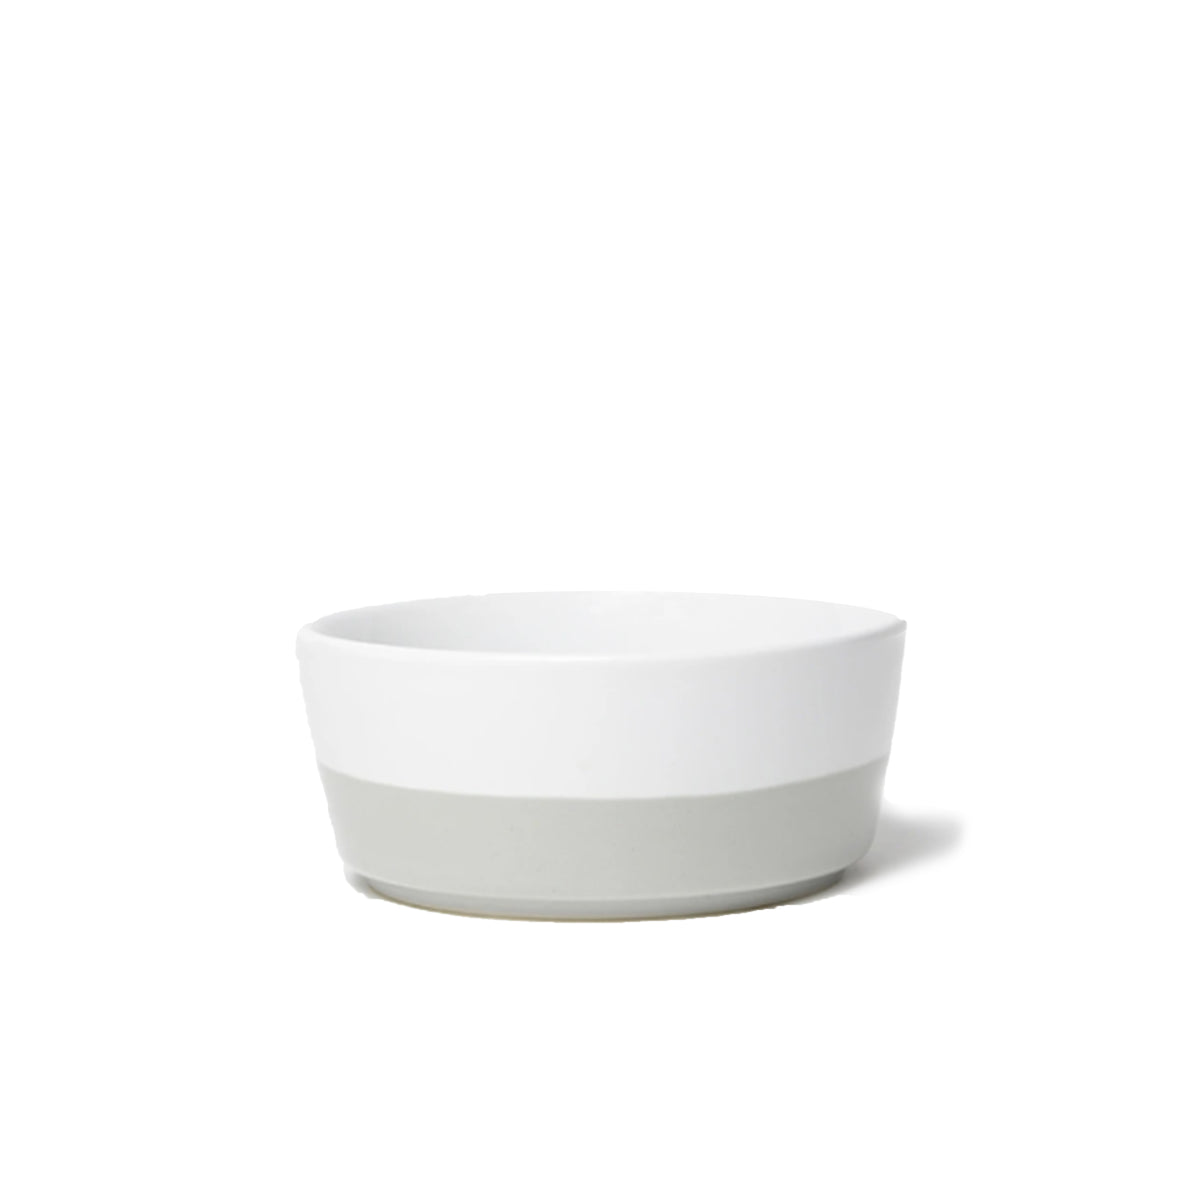 Light Grey Dipper Dog Bowl - All She Wrote